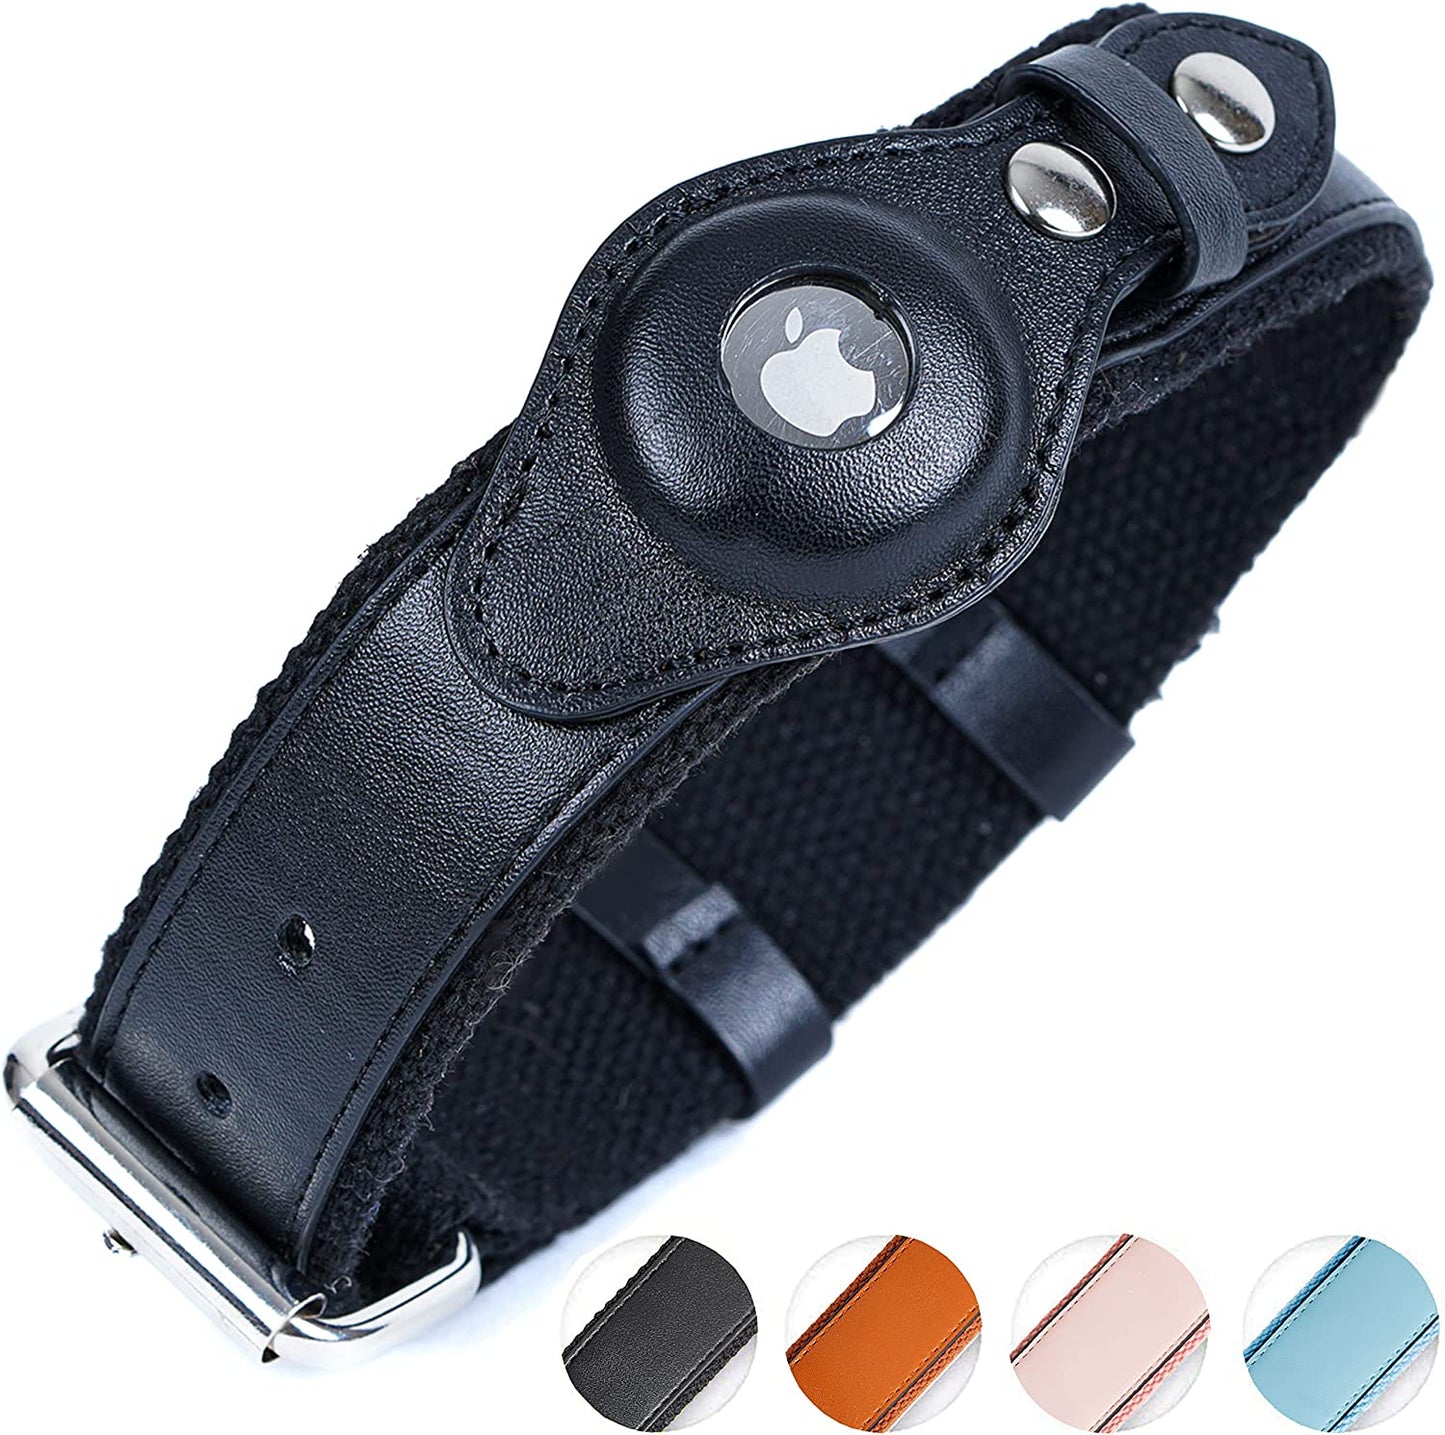 Safe Paws Airtag Dog Collar Holder - Our Adjustable Air Tag Dog Collar Holder Fits Small Medium and Large Dogs - Use Our Elegant PU Leather Dog Airtag Collar to Quickly Locate Your Dog Electronics > GPS Accessories > GPS Cases Safe Paws Black Small 